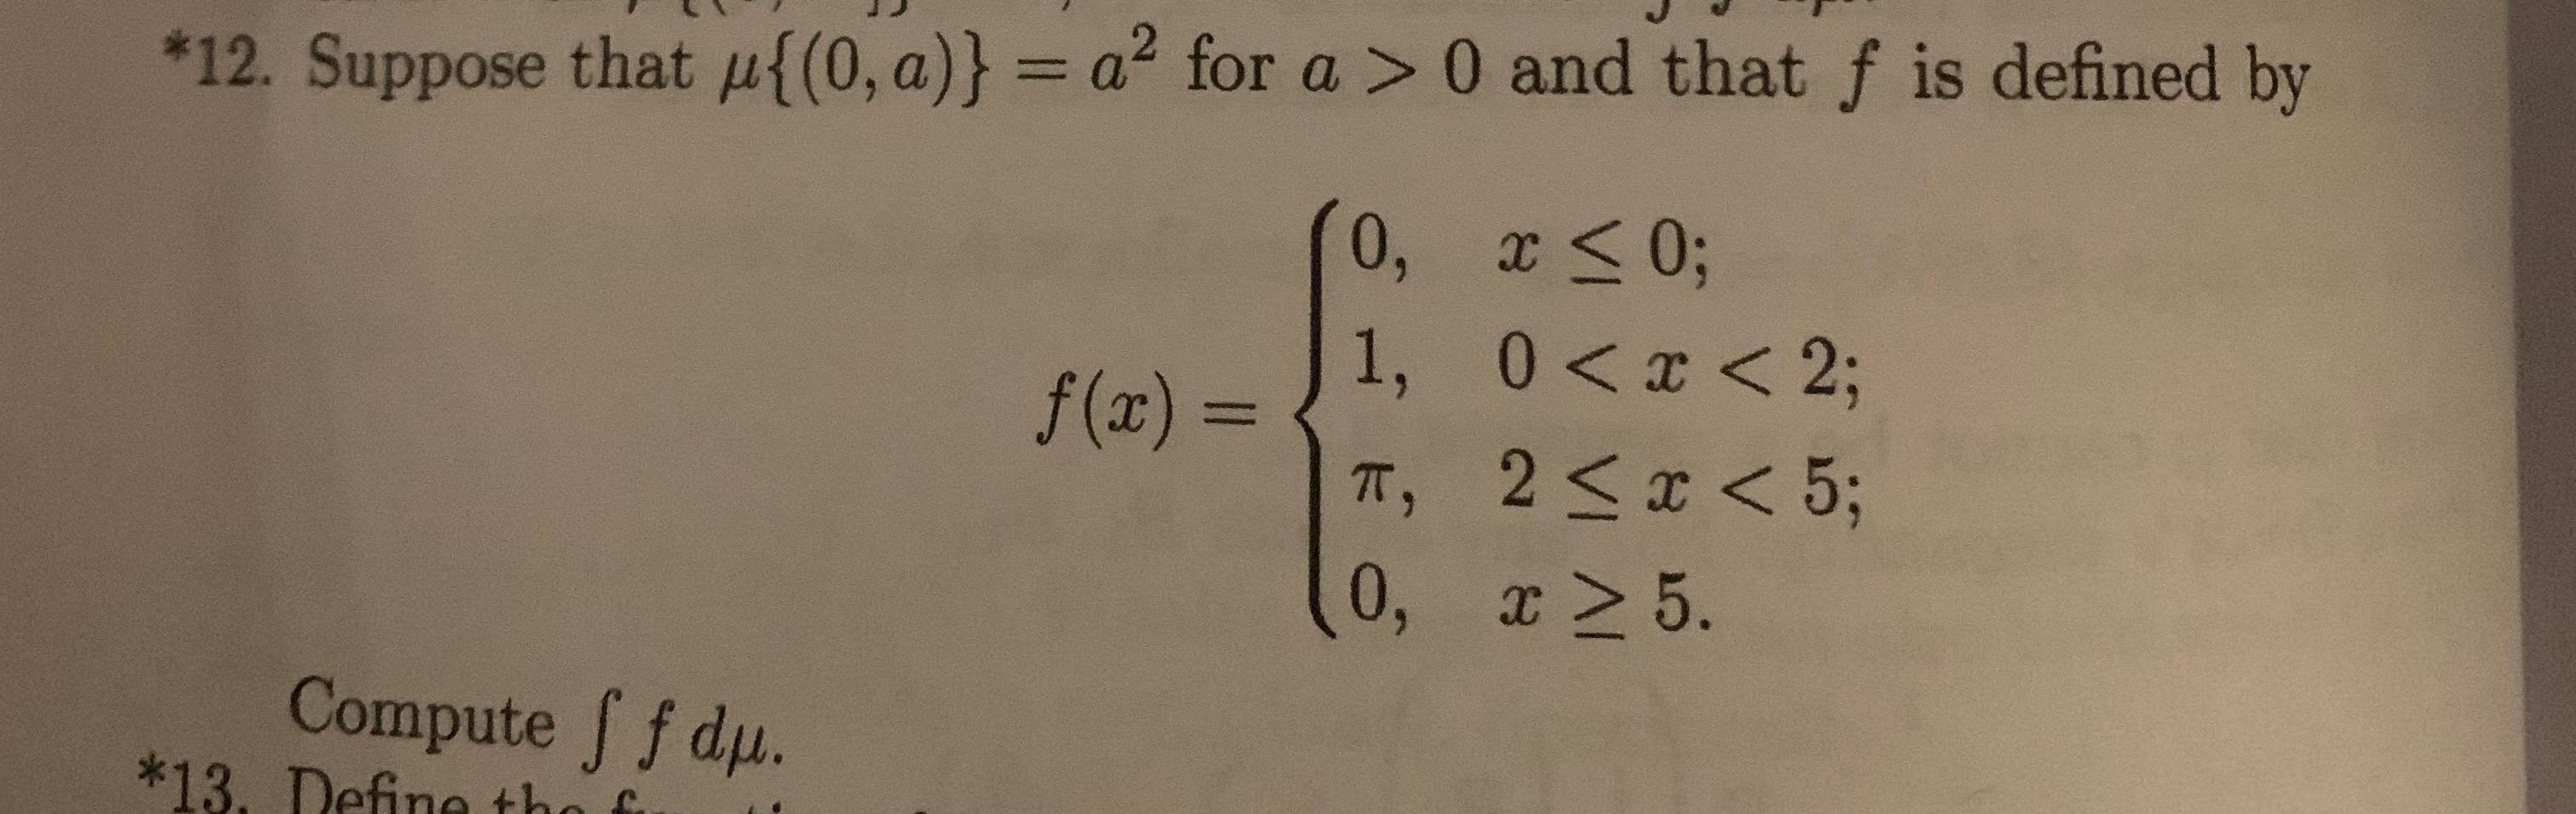 *12. Suppose that {(0, a)} = a for a > 0 and that f is defined by 0, x  0; 1, 0